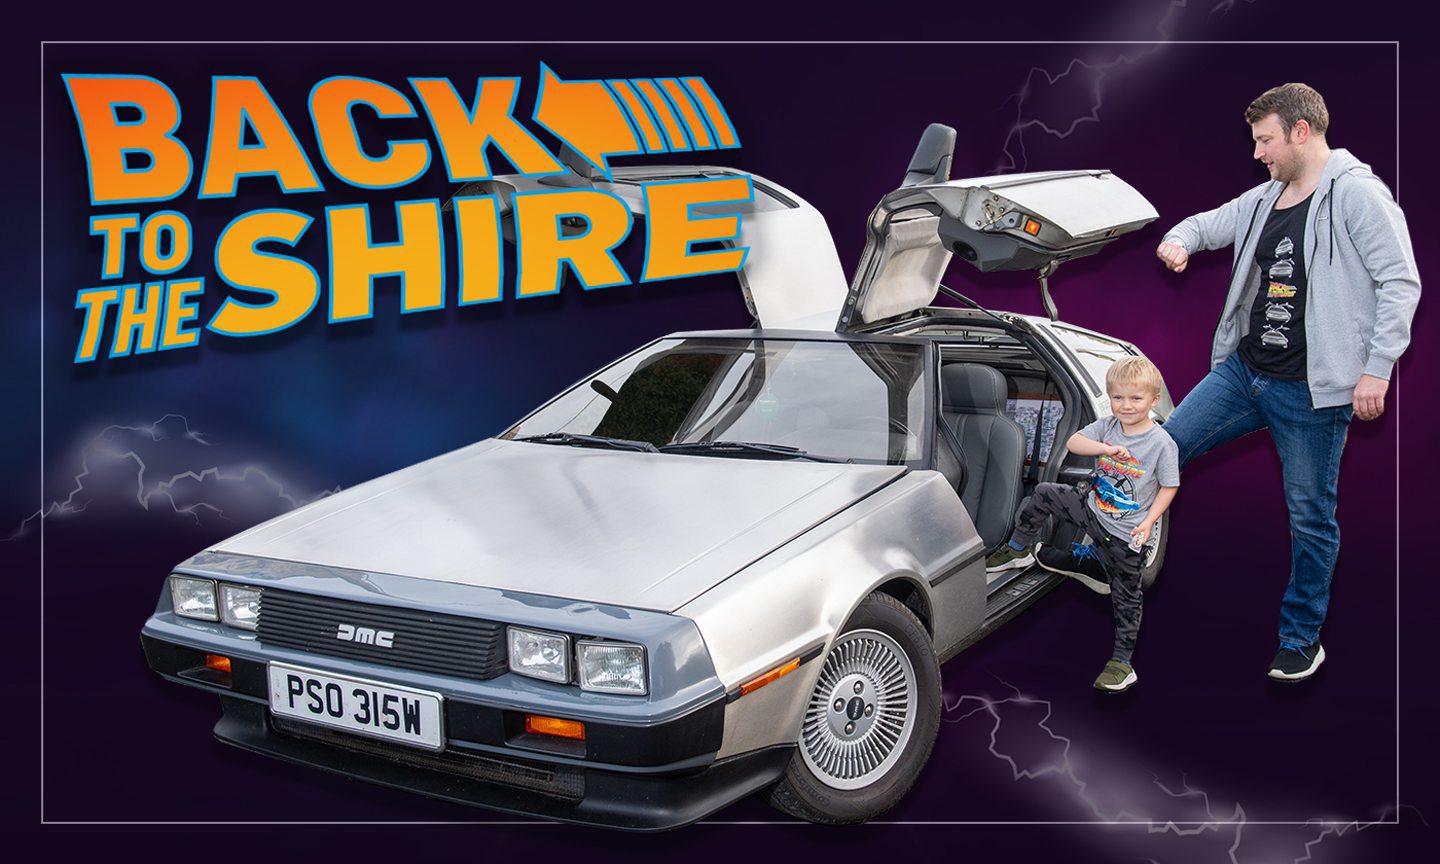 John McAulay and son Fraser check their watches next to the DeLorean with lettering saying "Back to the Shire".